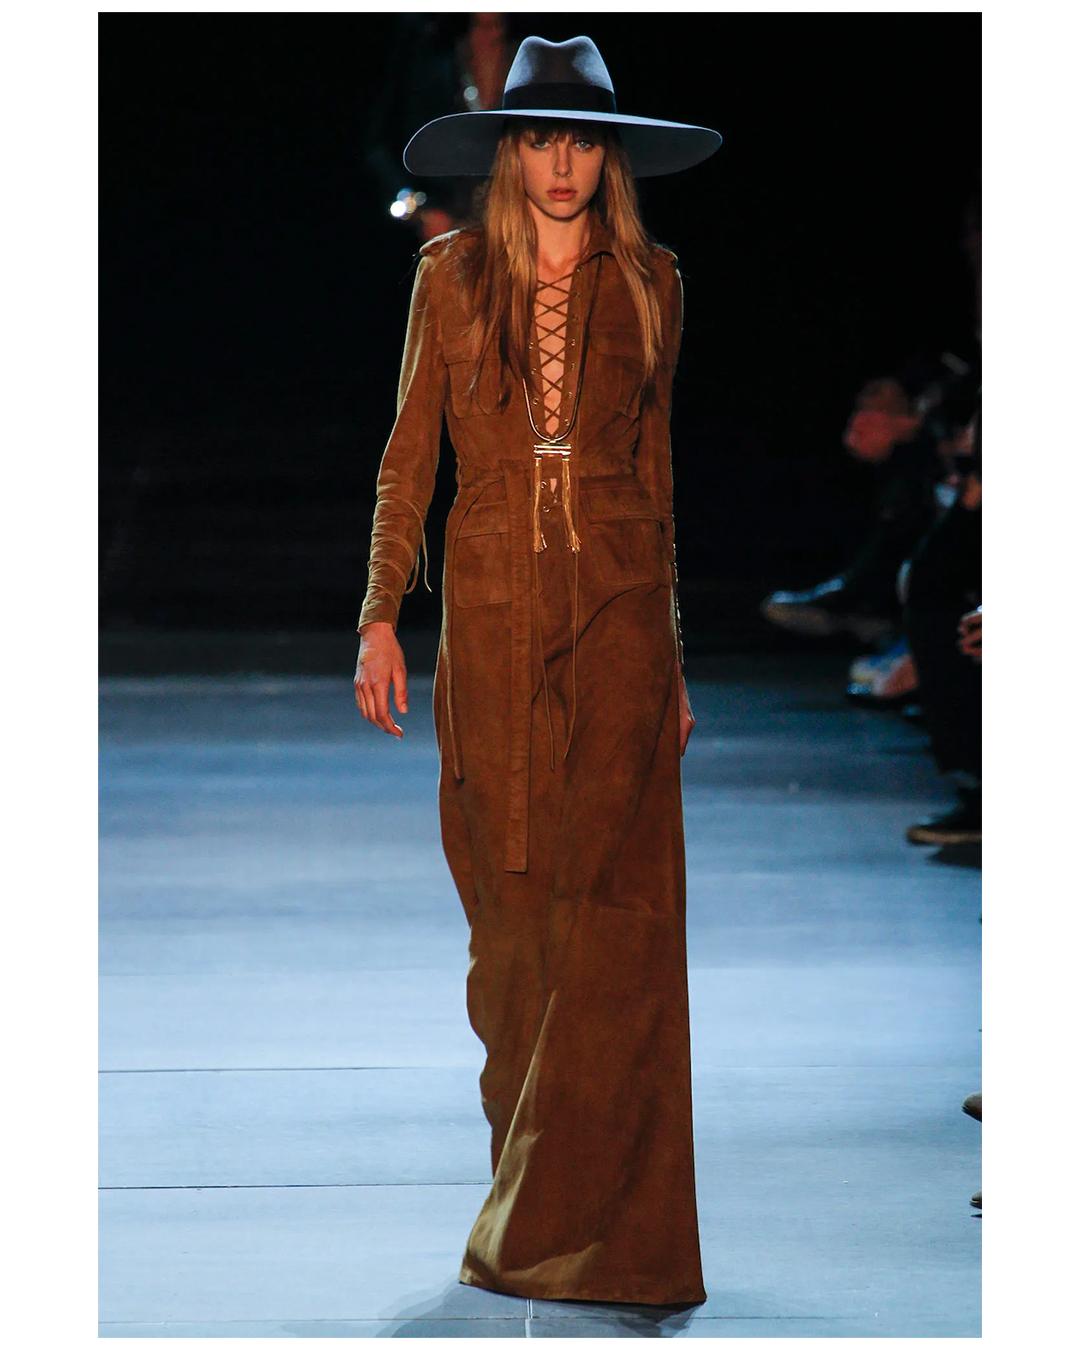 Saint Laurent S/S 13 tan suede leather safari style lace up belted mini dress  For Sale 10